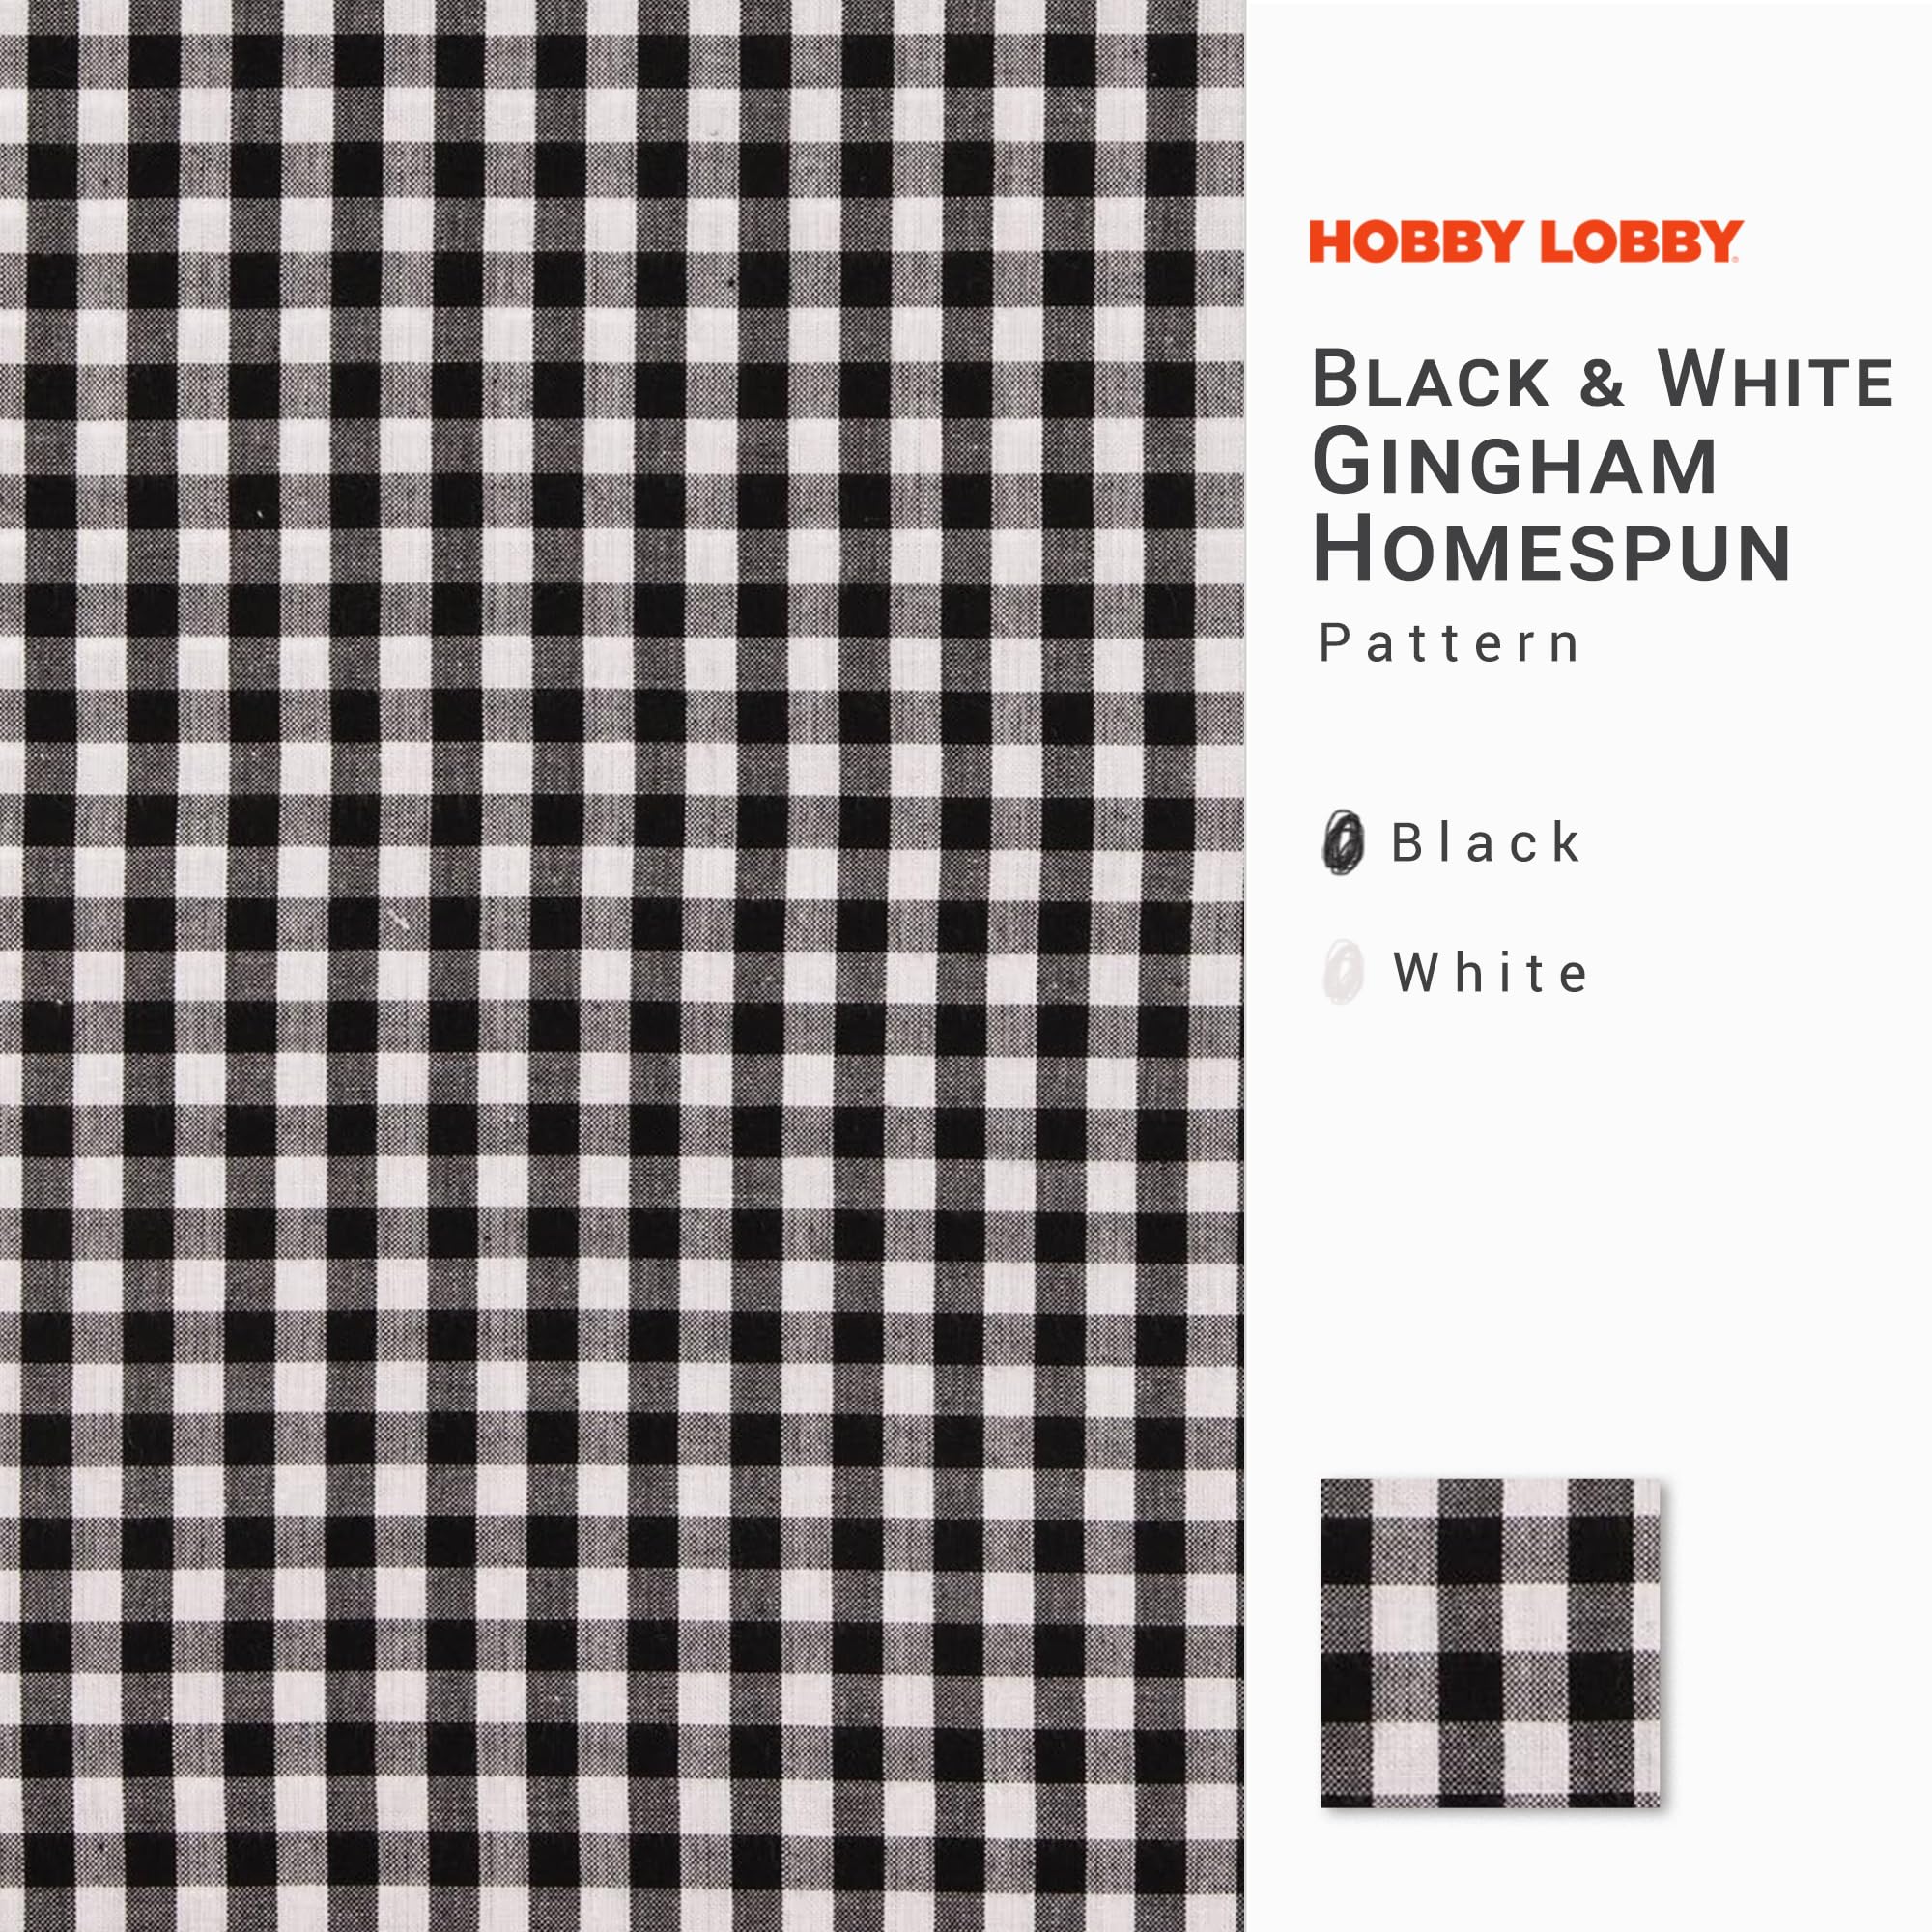 Black & White Gingham Homespun Cotton Fabric (1 Yard) – Printed Sewing Fabric by The Yard – Very Lightweight Precut Fabric for Sewing Clothes, Homeware, & Other Accessories – DIY Craft Fabric